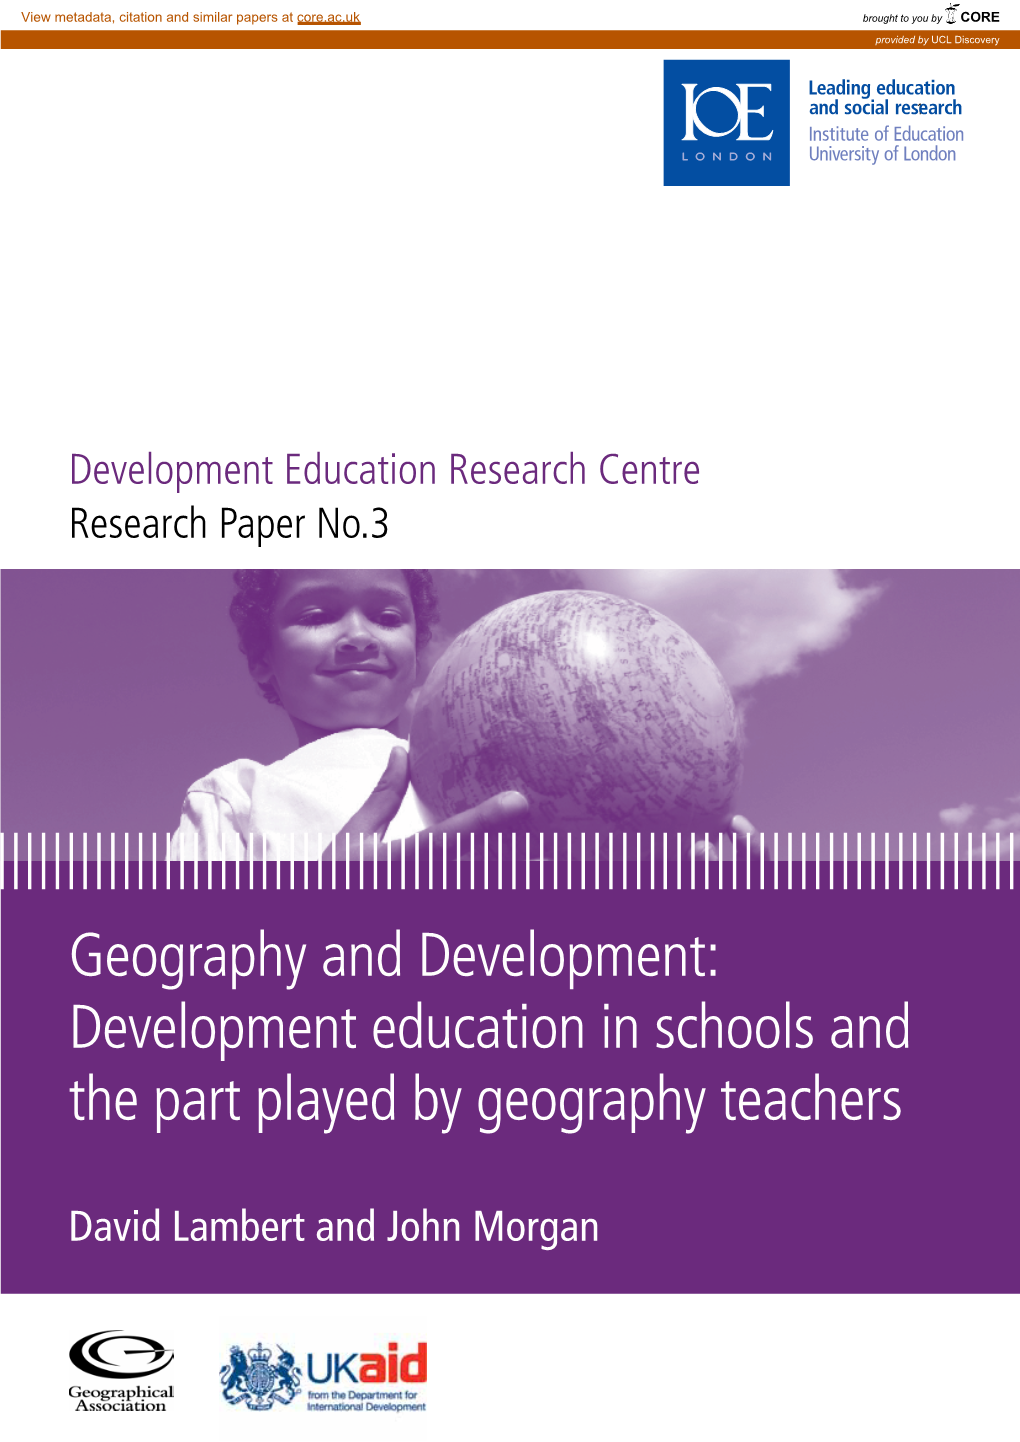 Geography and Development: Development Education in Schools and the Part Played by Geography Teachers